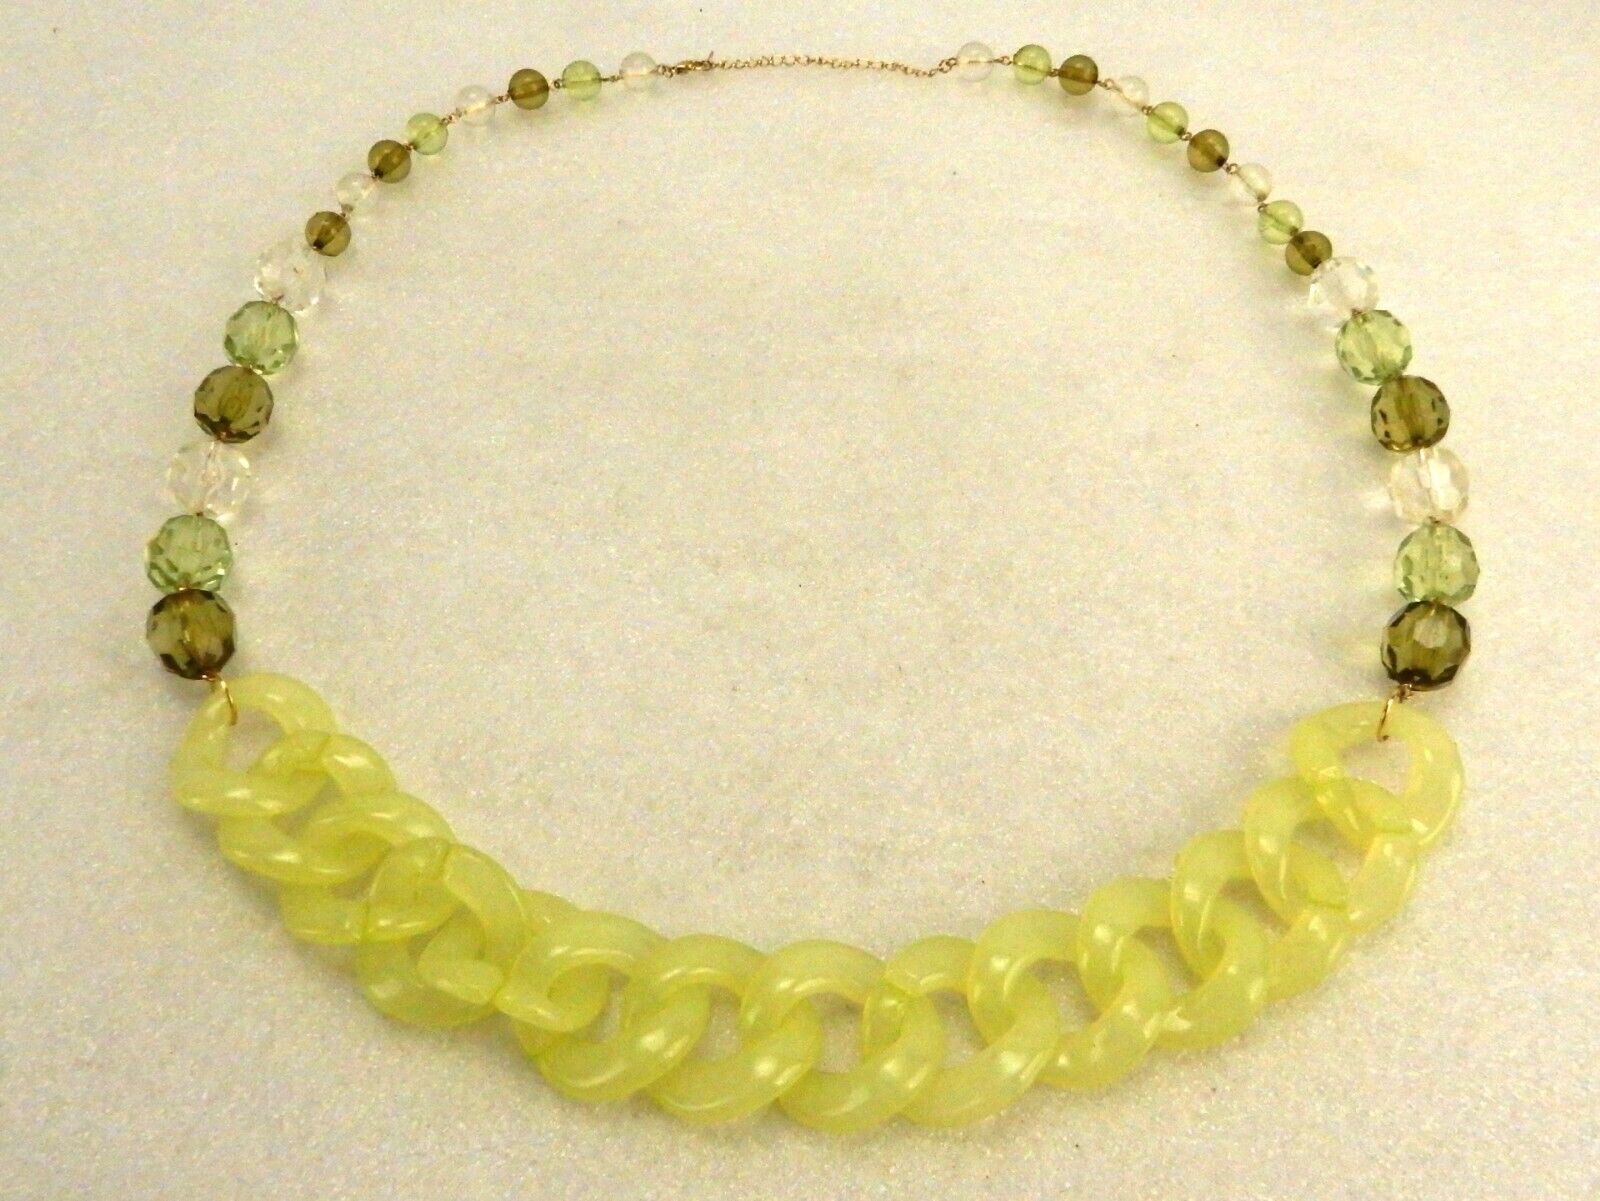 Primary image for Large Statement Necklace, Chunky Acrylic Curb Links, Faceted Beads, #JWL-204